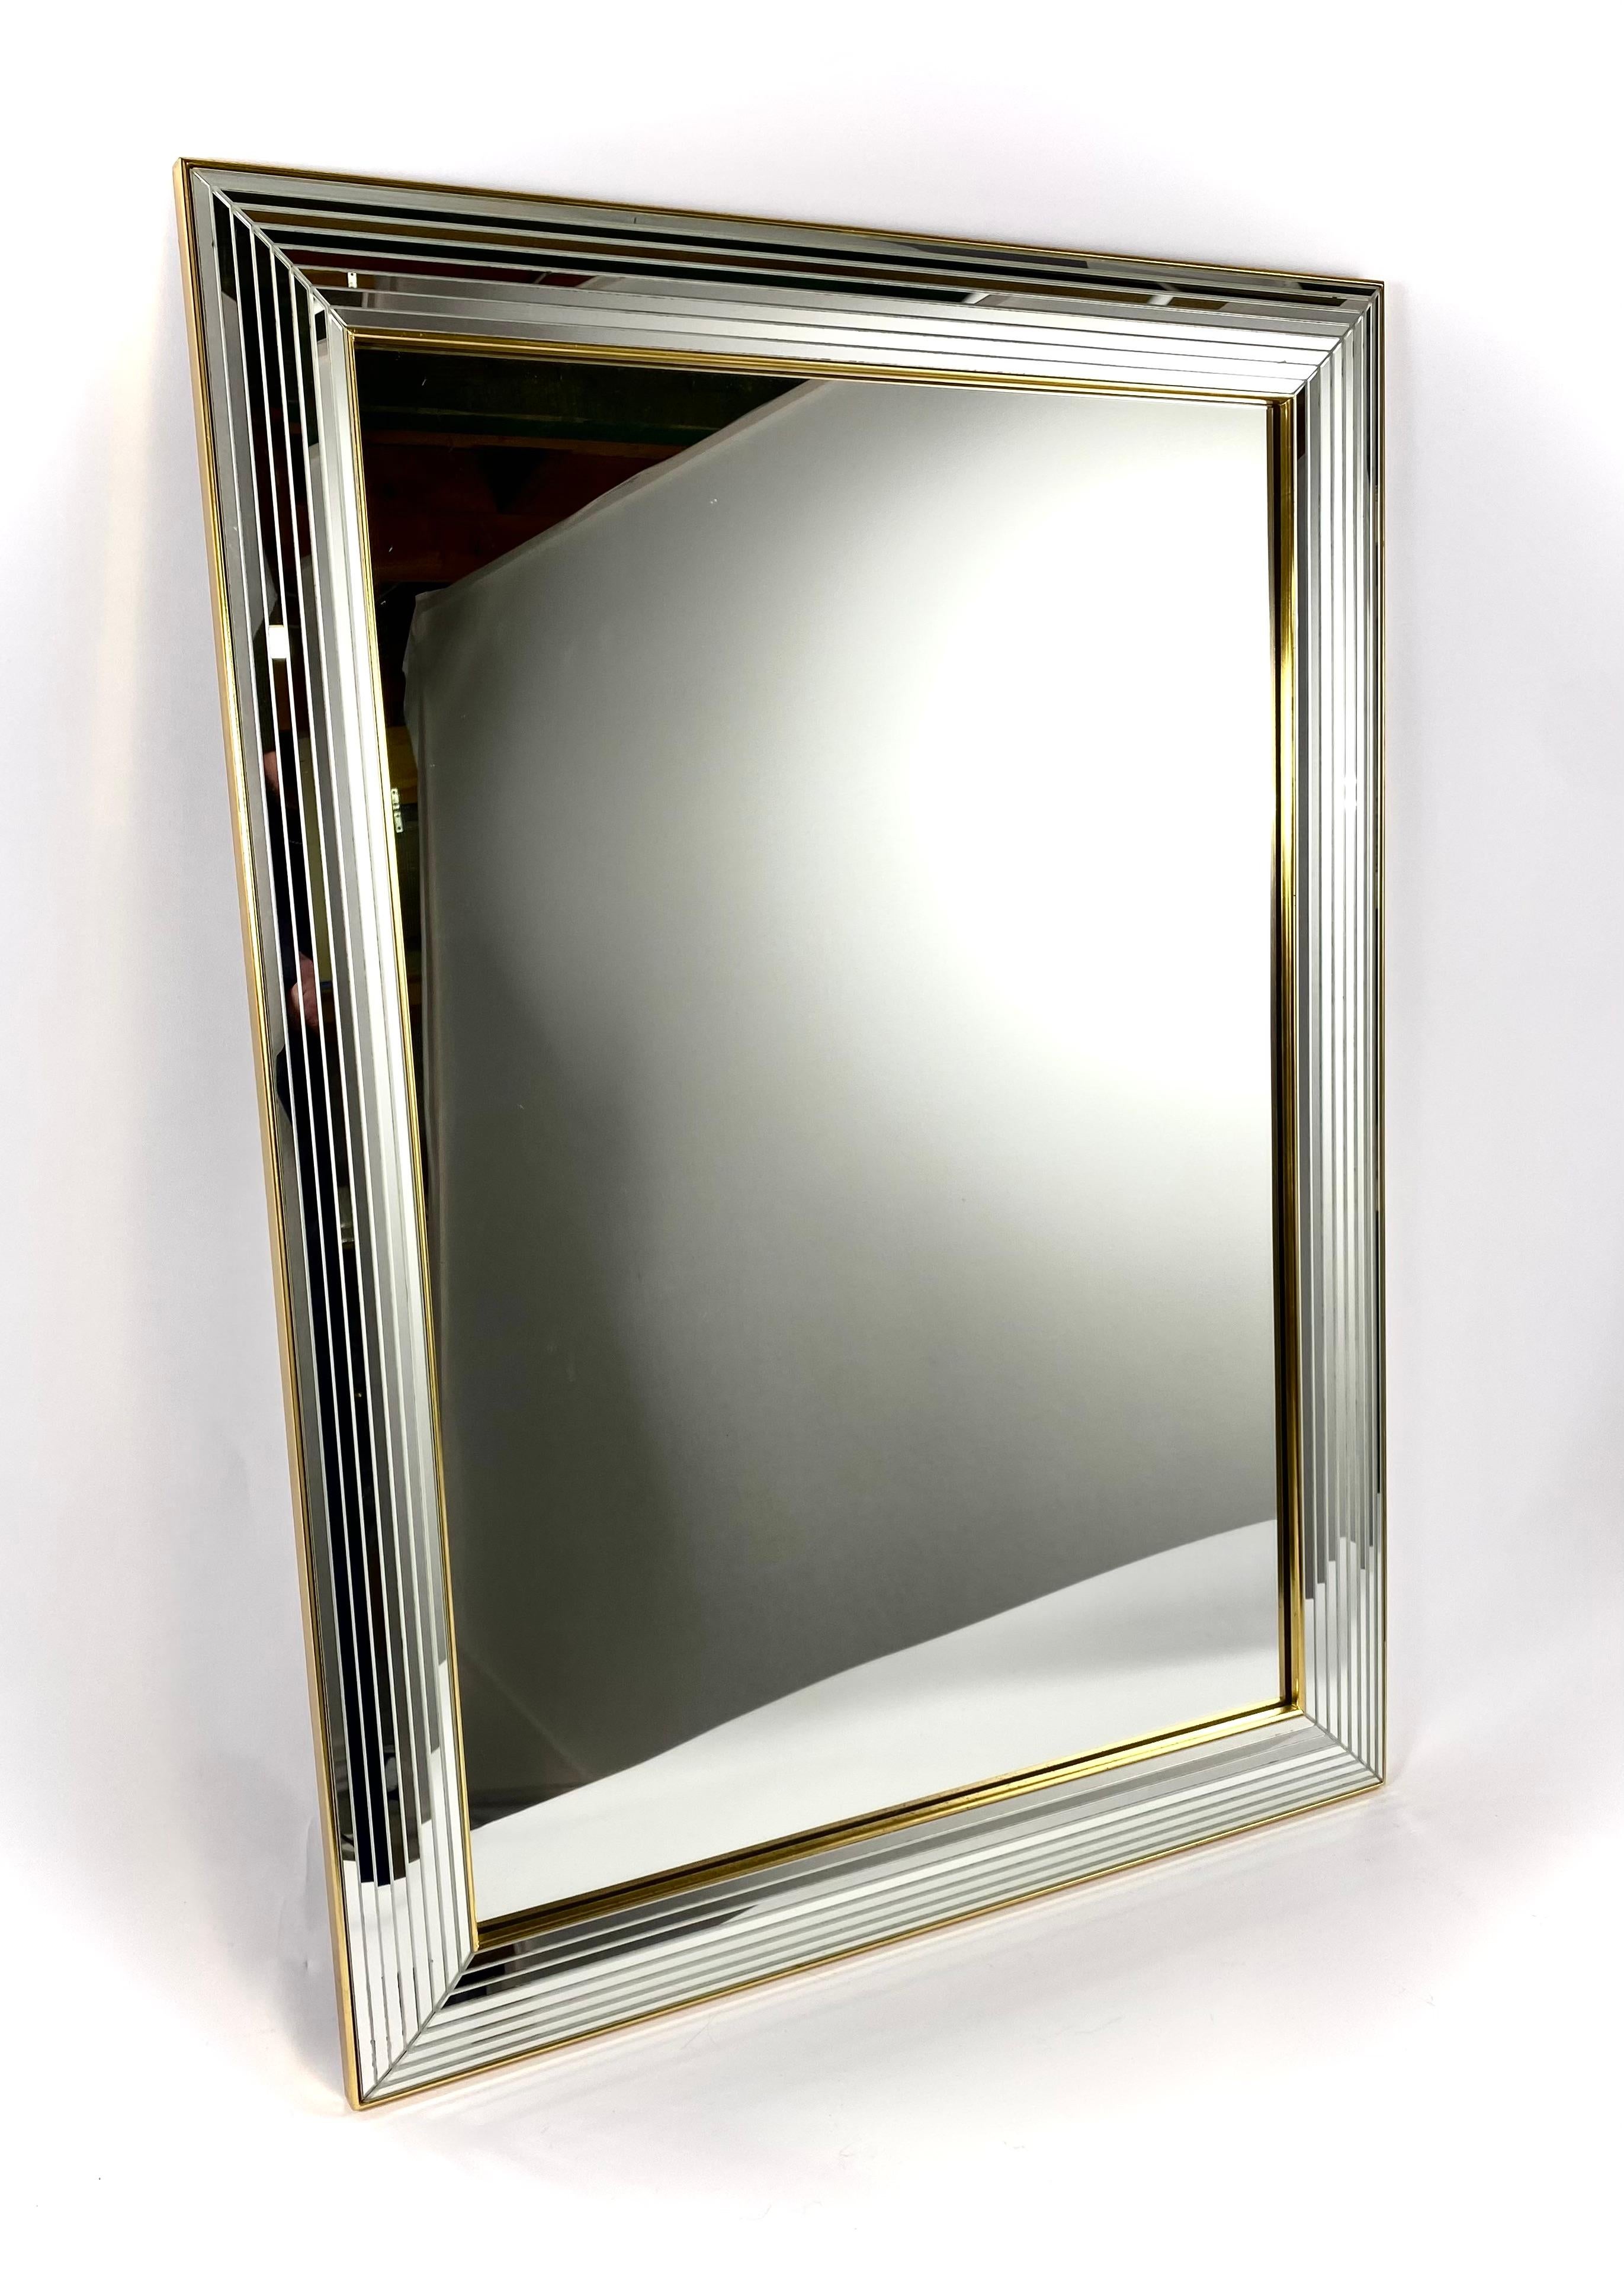 Vintage mirror by the Belgian producer Deknudt from the 1980s in Hollywood Regency style.

Beautiful mirror with a glass frame with a golden strip. The frame is made with small facet cut mirrors in the full width and finished with a brass edge.

The